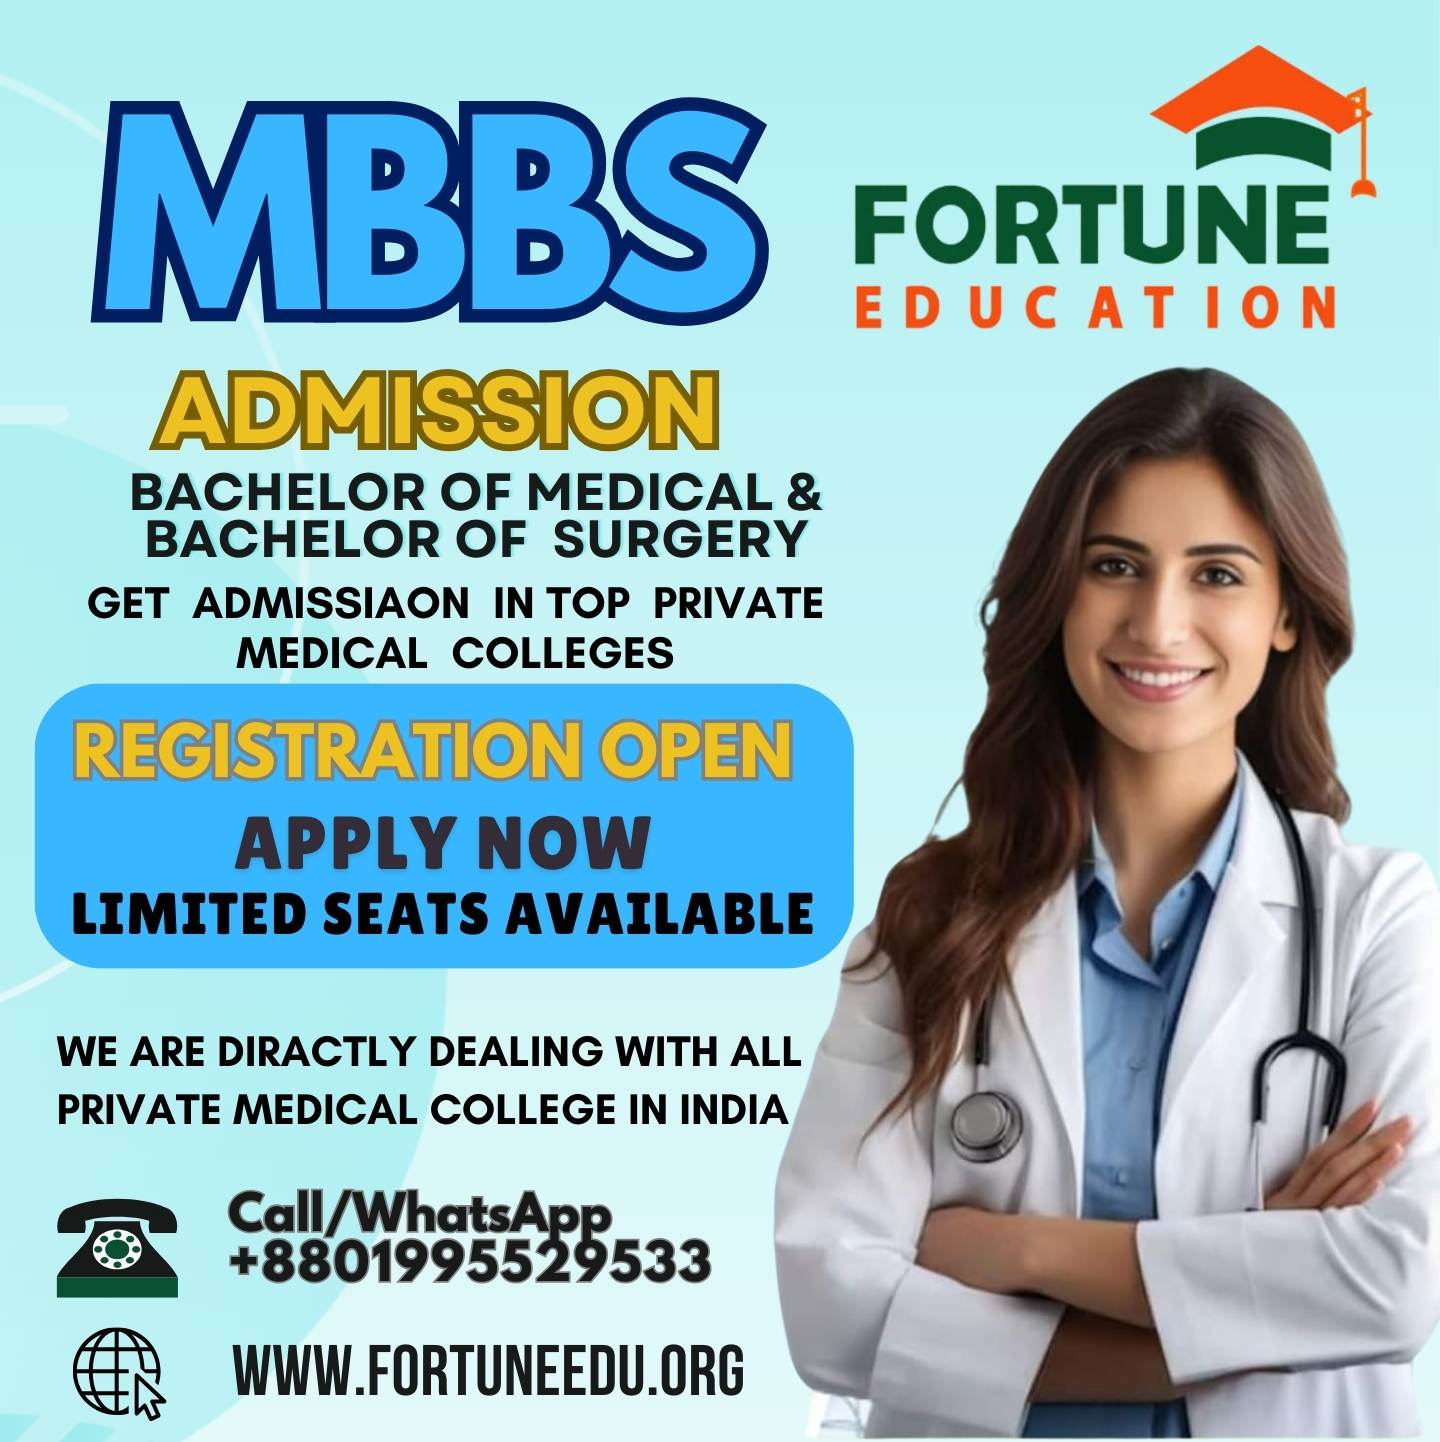 Features of Army Medical Colleges